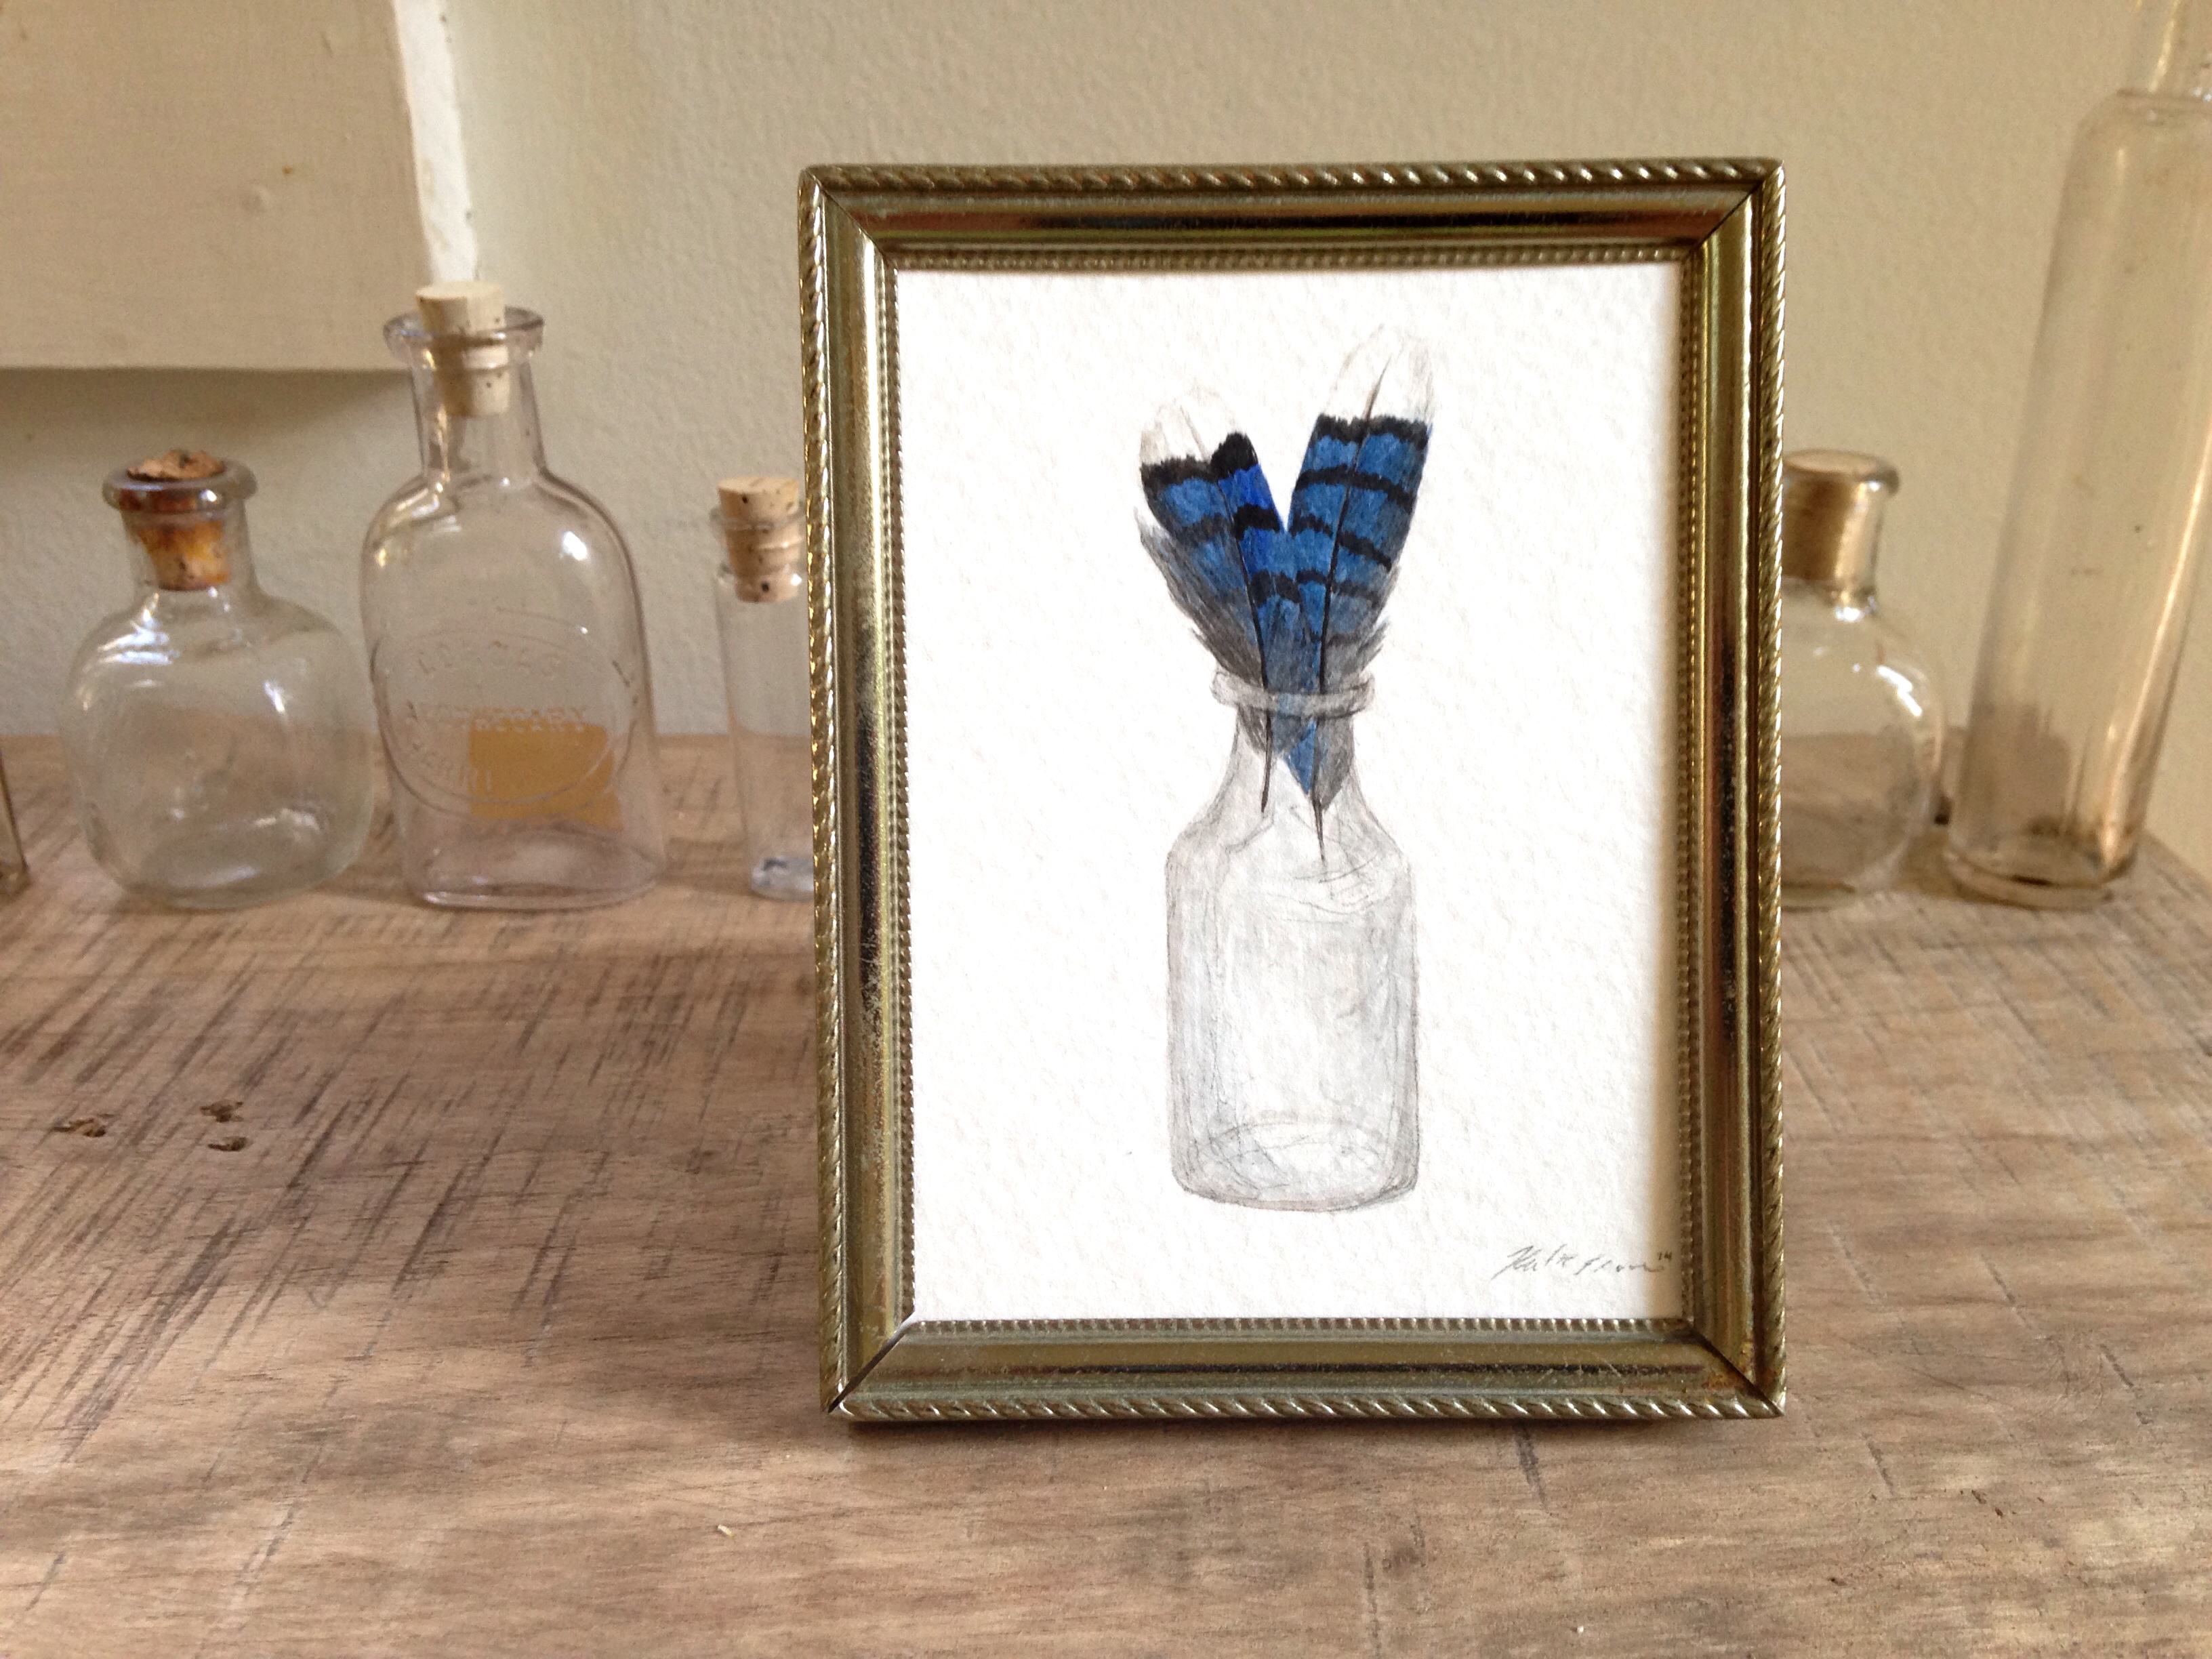 Blue Jay Feathers in a Glass Jar, Original Bird Feather Watercolor Painting